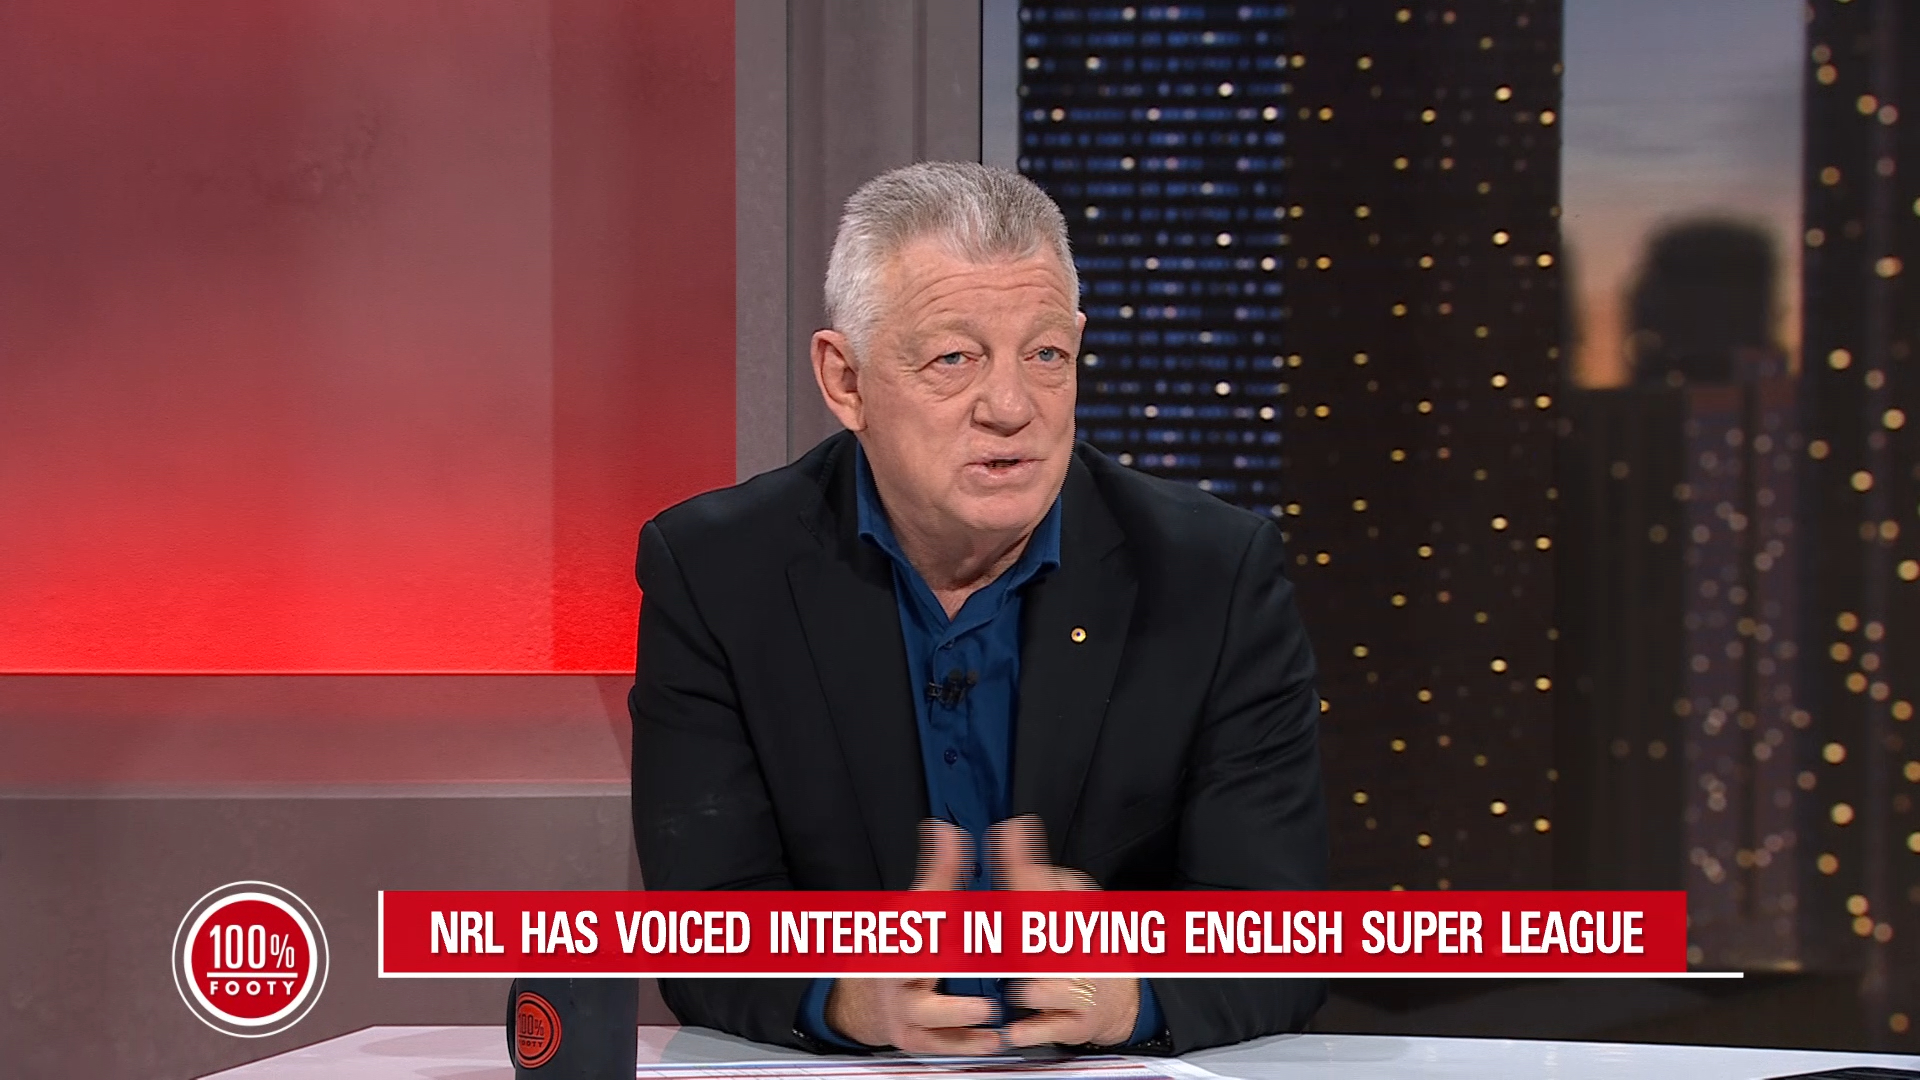 Gal's plea to NRL over Super League buy